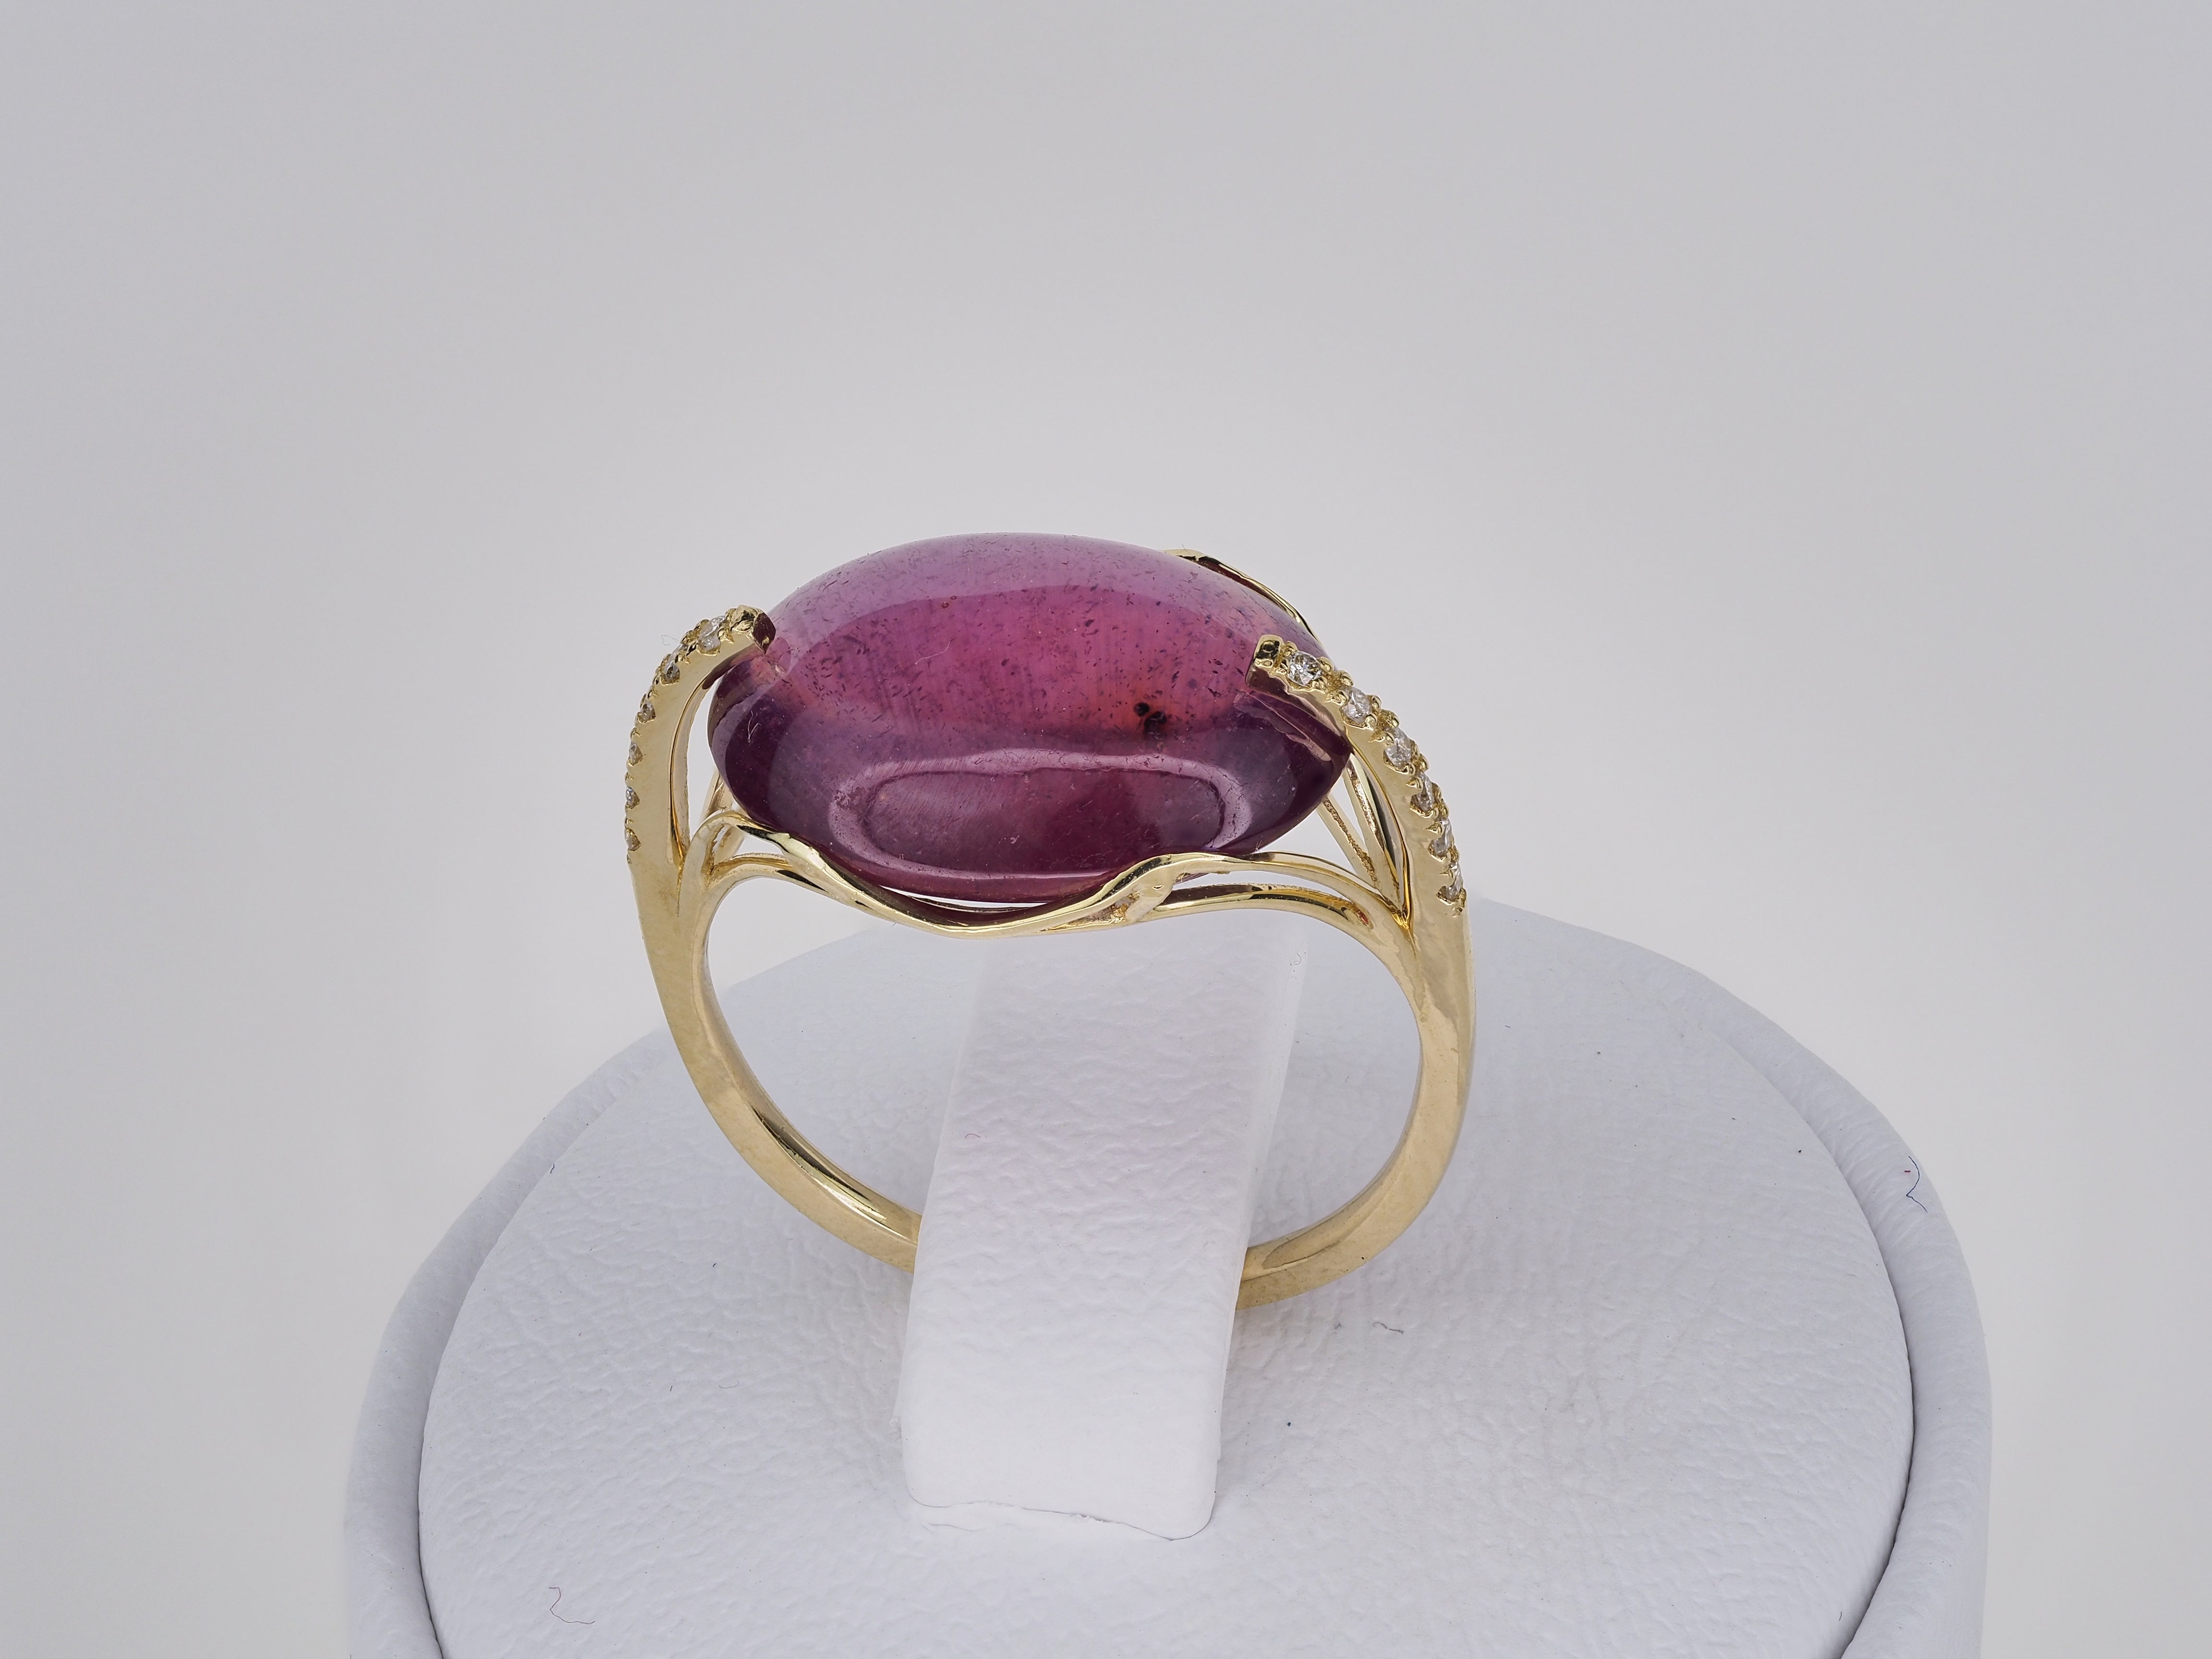 14 kt  gold ring with cabochon riby and diamonds
Weight: 3.15 g. 
14k yellow gold
Size: 17 (7 USA) - non resizable. 
Set with natural ruby, color - light purplish red.
Oval cabochon cut, 9 ct. in total,  11.55х15.33х4.46 mm.
Clarity: Transparent